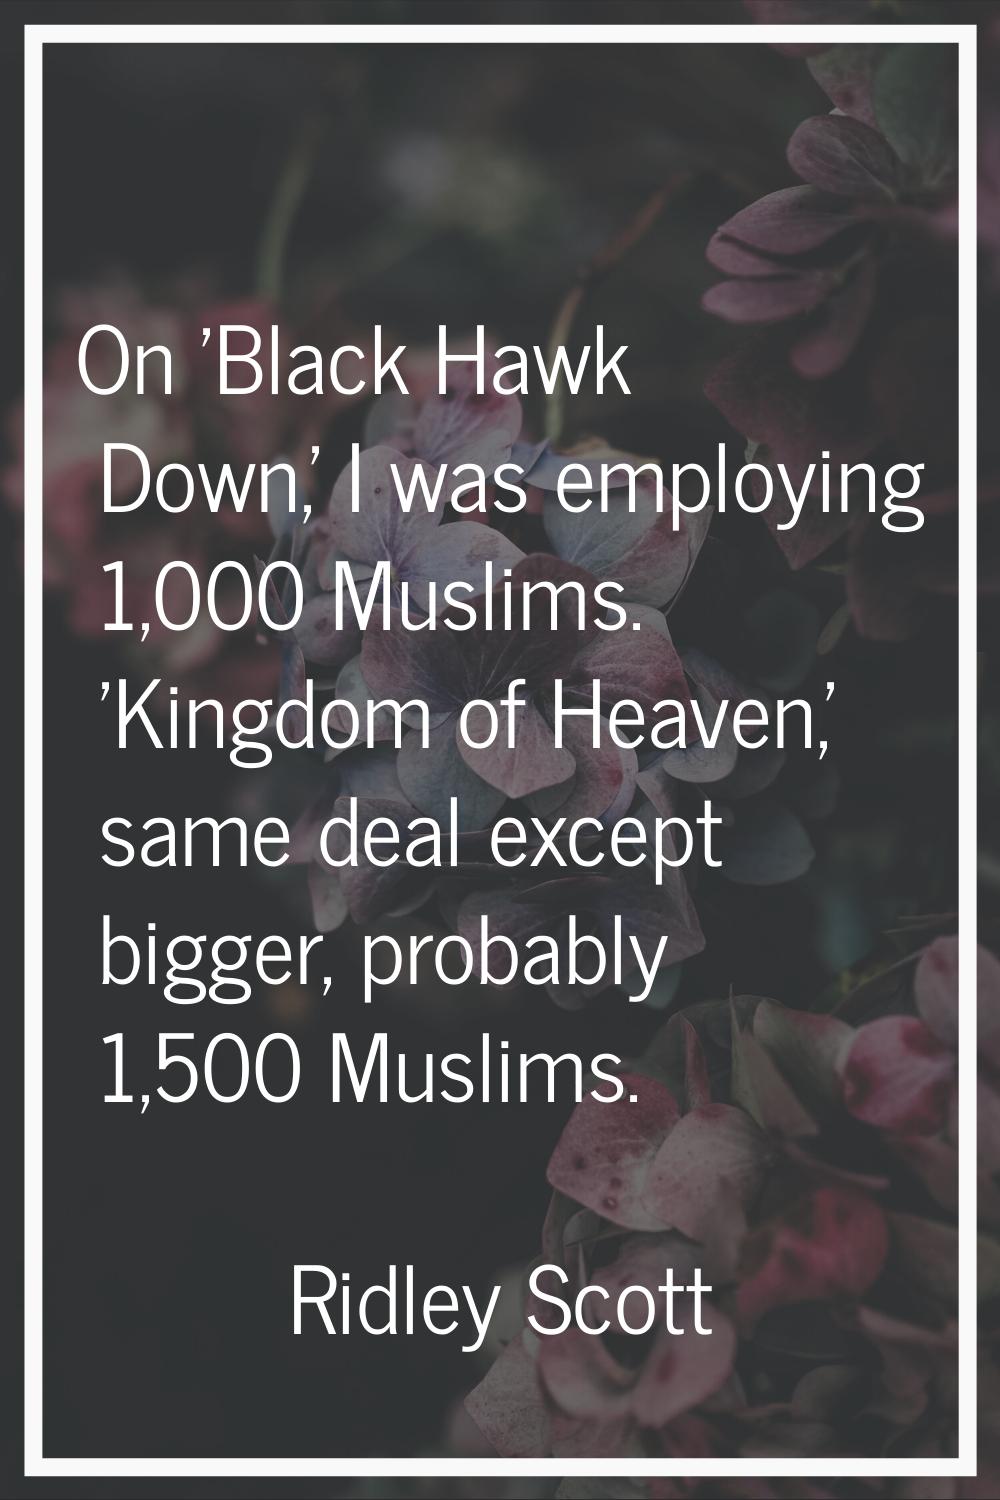 On 'Black Hawk Down,' I was employing 1,000 Muslims. 'Kingdom of Heaven,' same deal except bigger, 